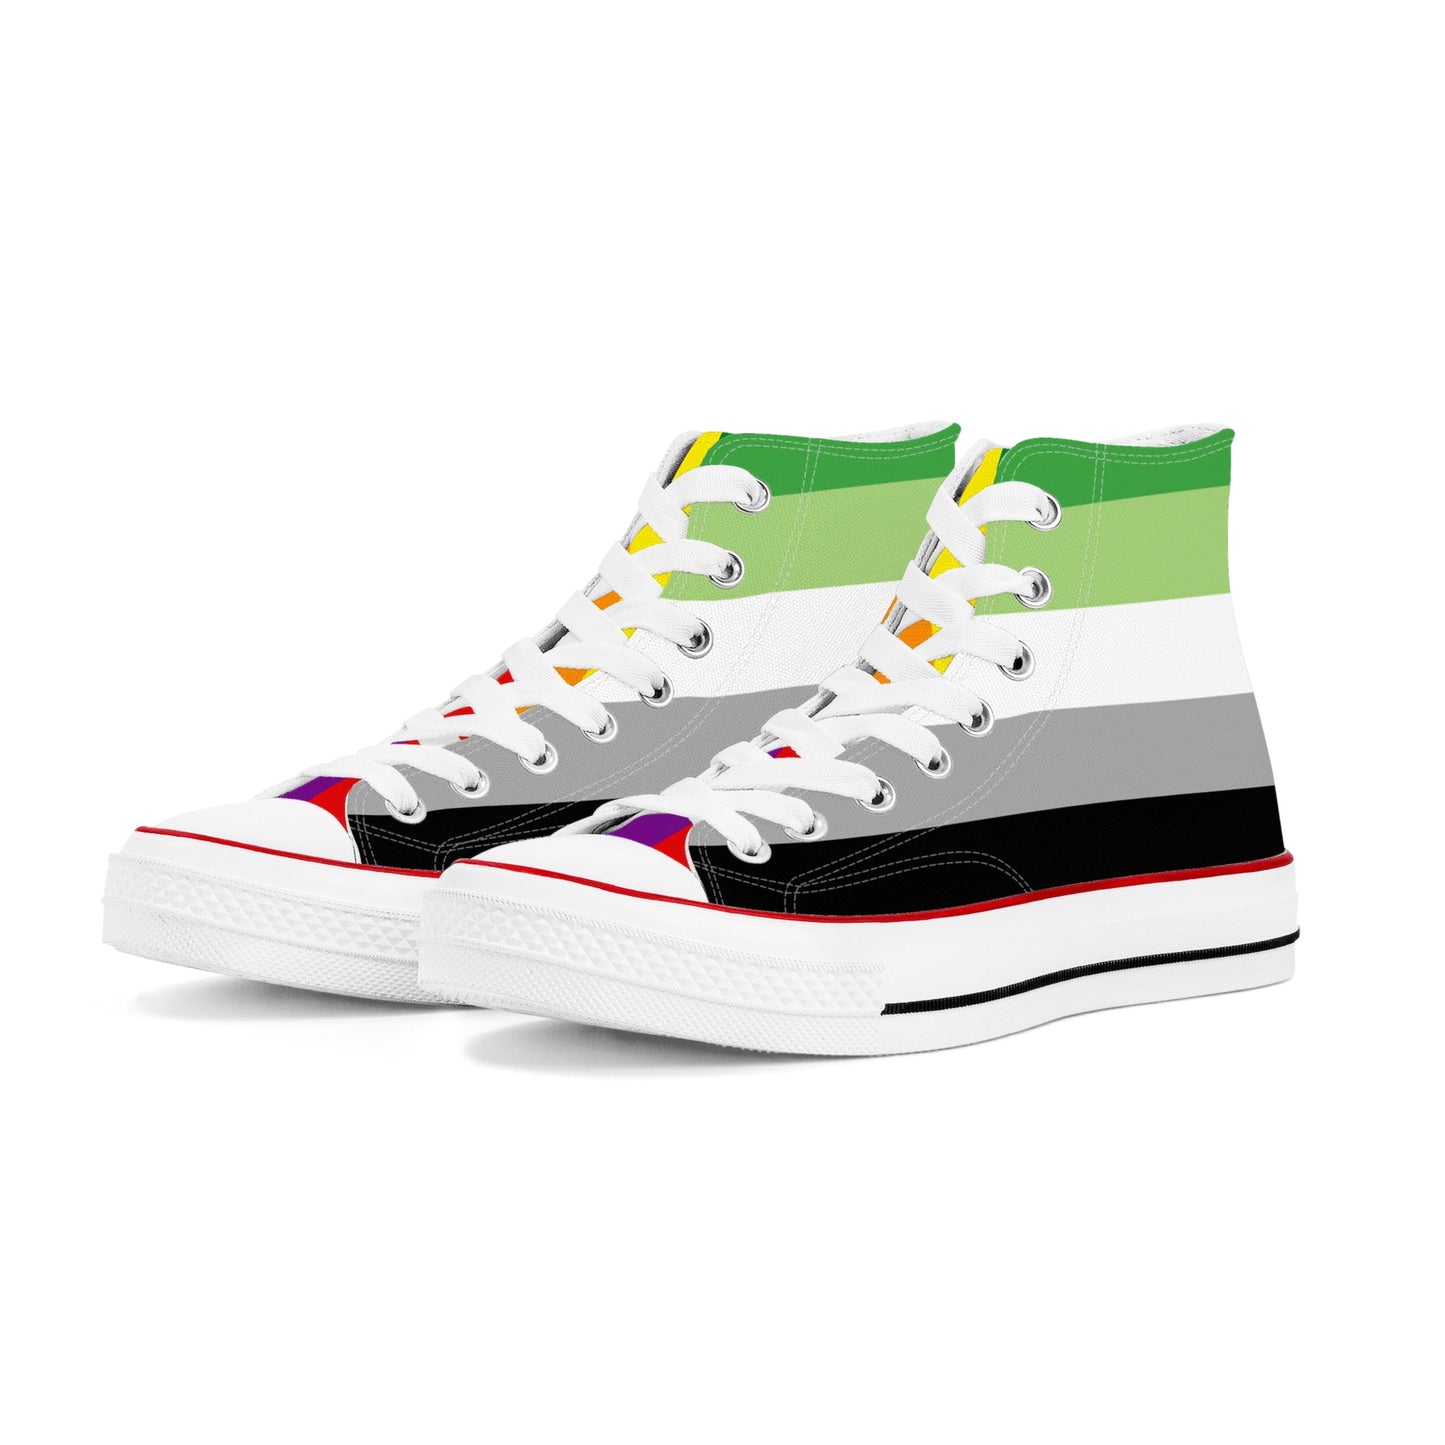 Aromantic Pride Collection - Womens Classic High Top Canvas Shoes for the LGBTQIA+ community